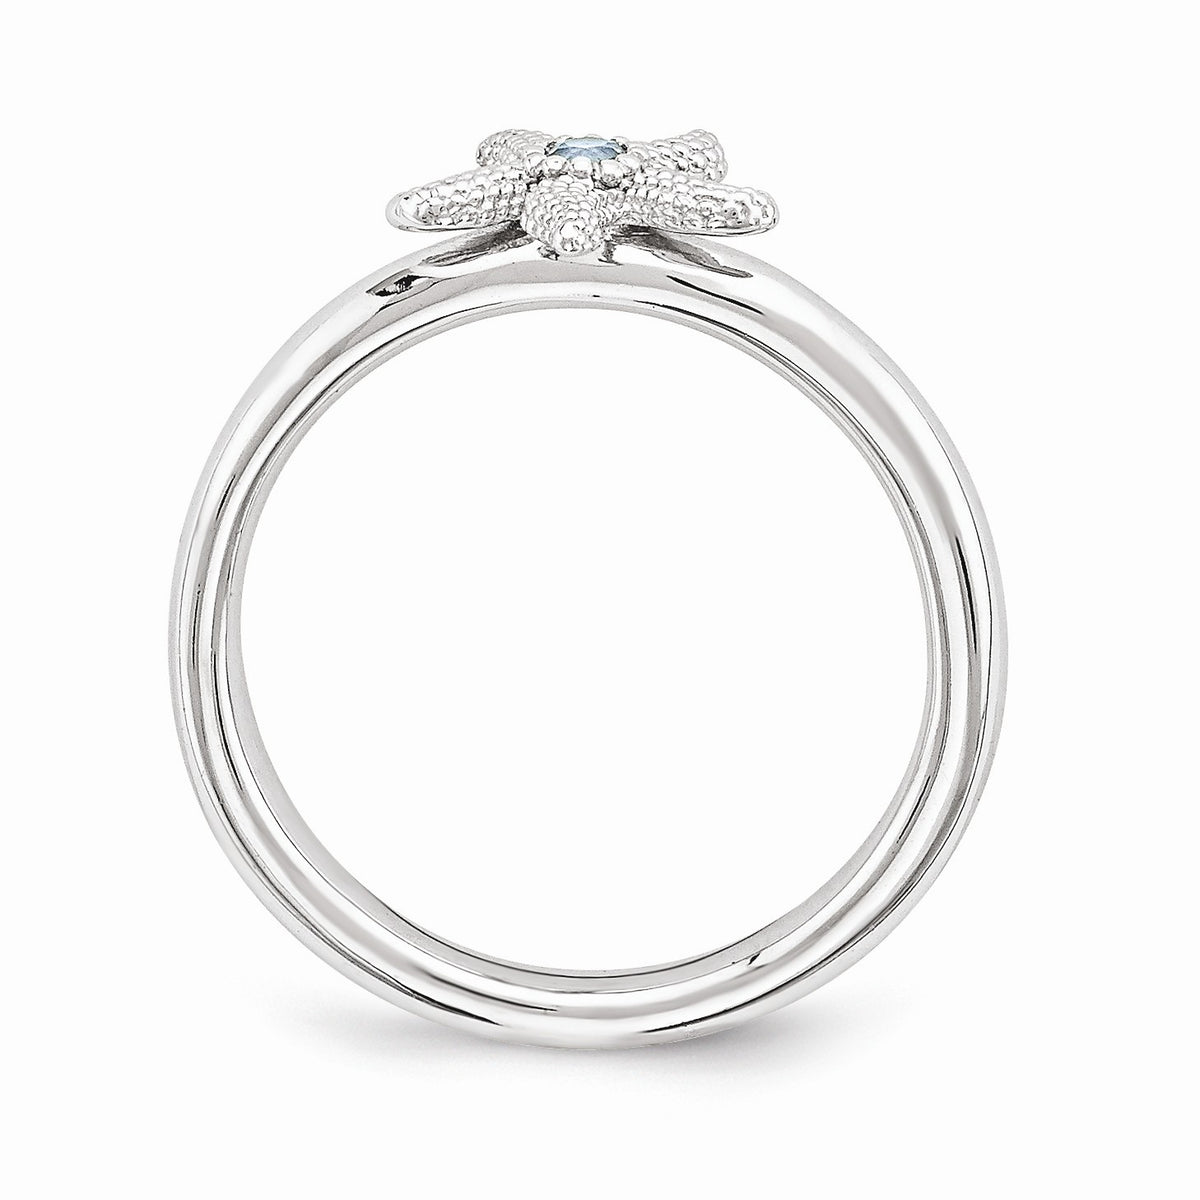 Alternate view of the Sterling Silver Stackable Expressions Blue Topaz 10mm Starfish Ring by The Black Bow Jewelry Co.